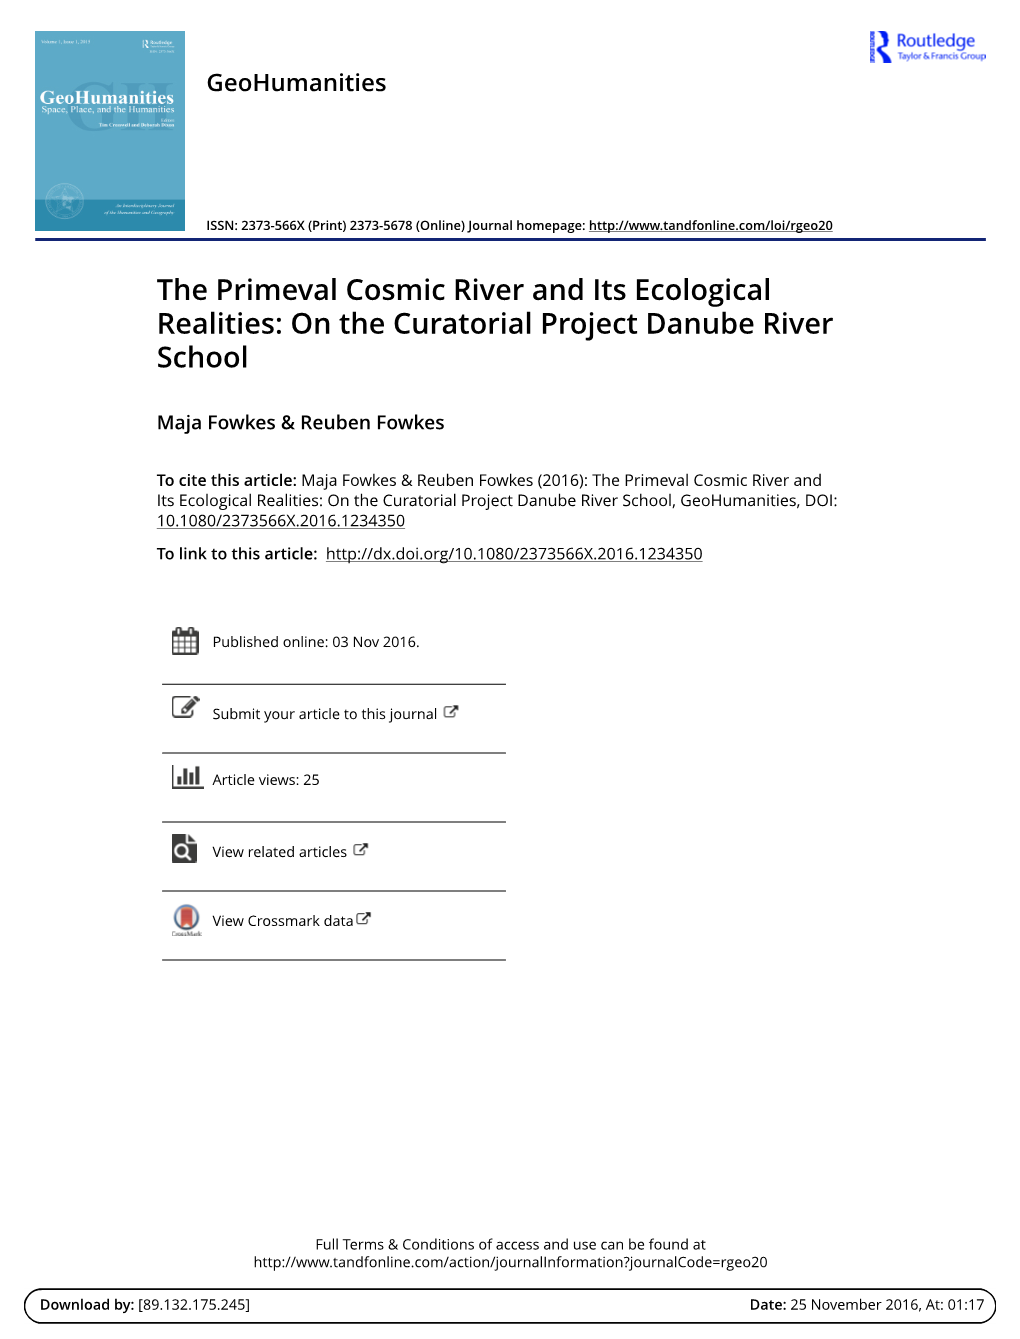 The Primeval Cosmic River and Its Ecological Realities: on the Curatorial Project Danube River School